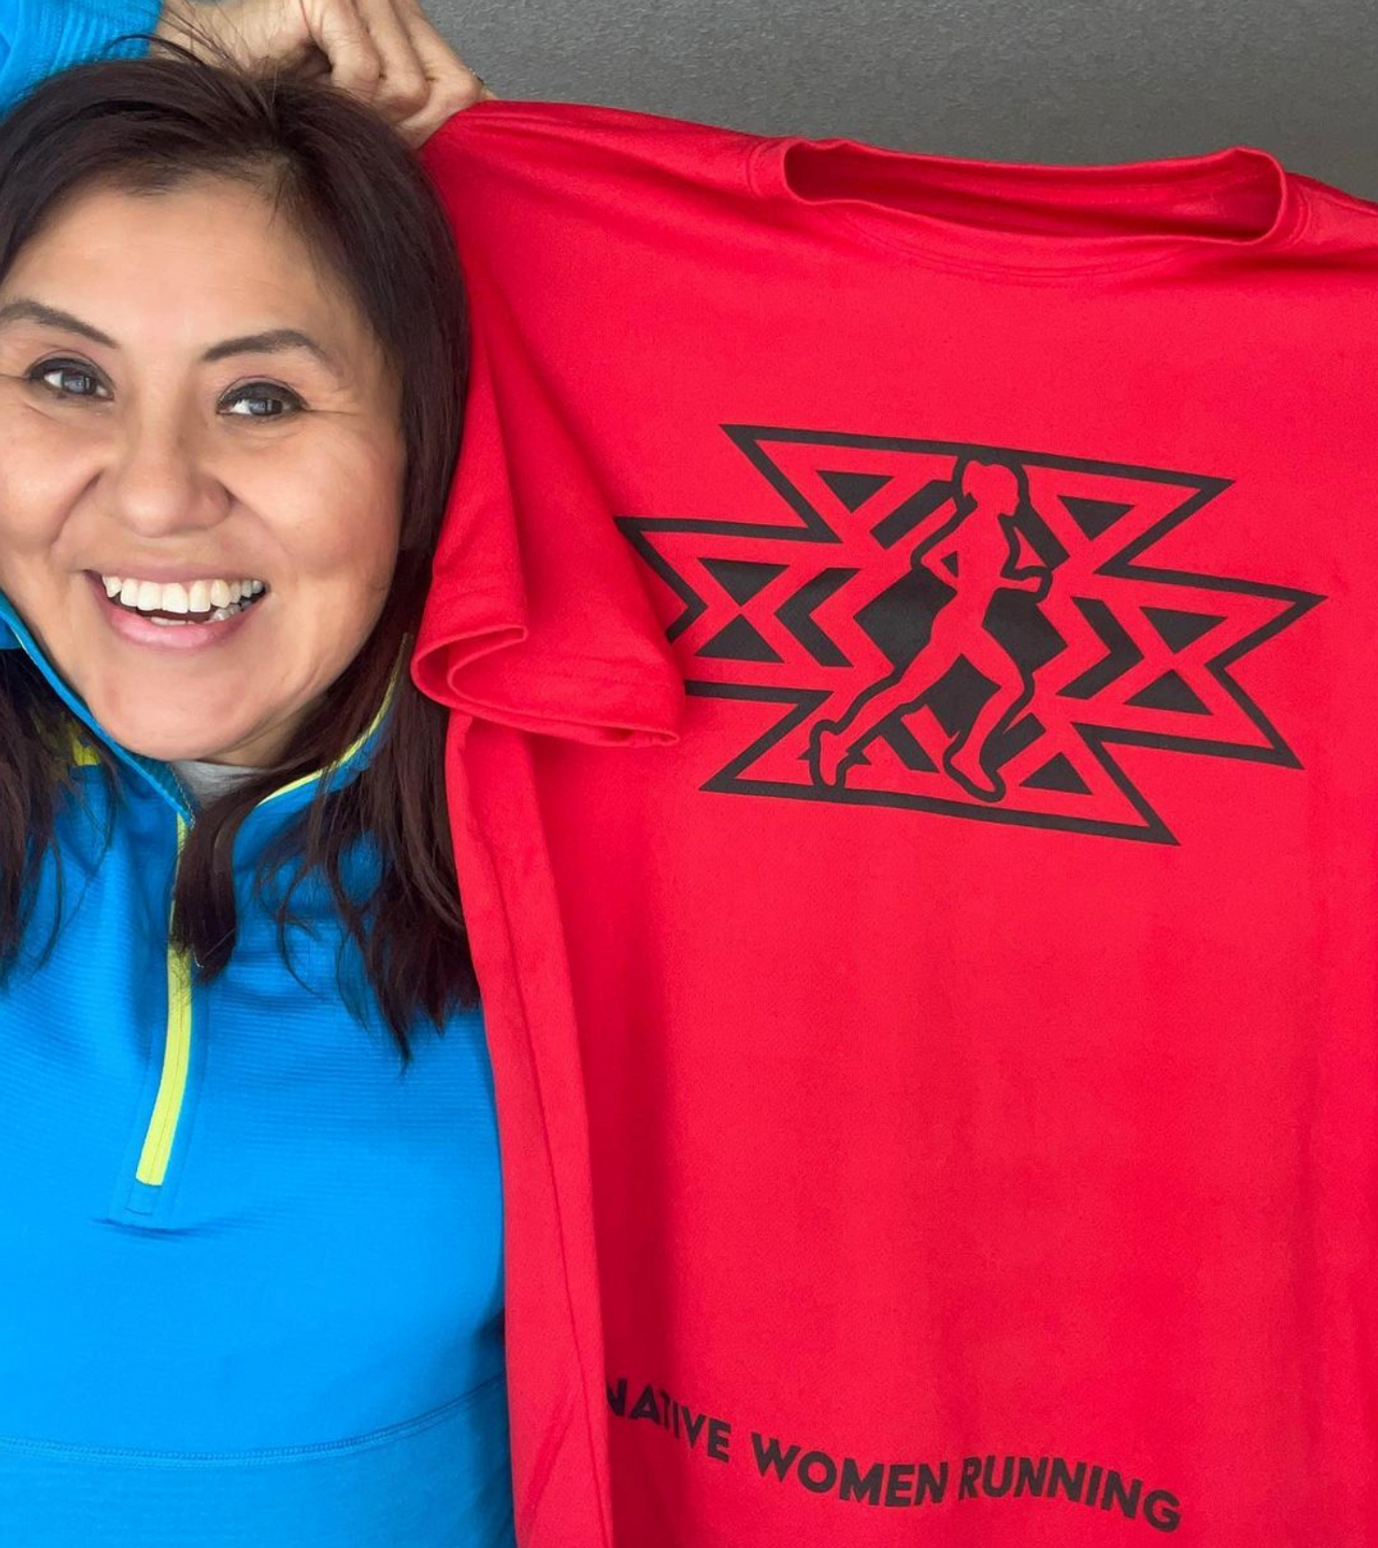 A smiling woman (Verna Volker) holds a red tshirt that reads "Native Women Running."